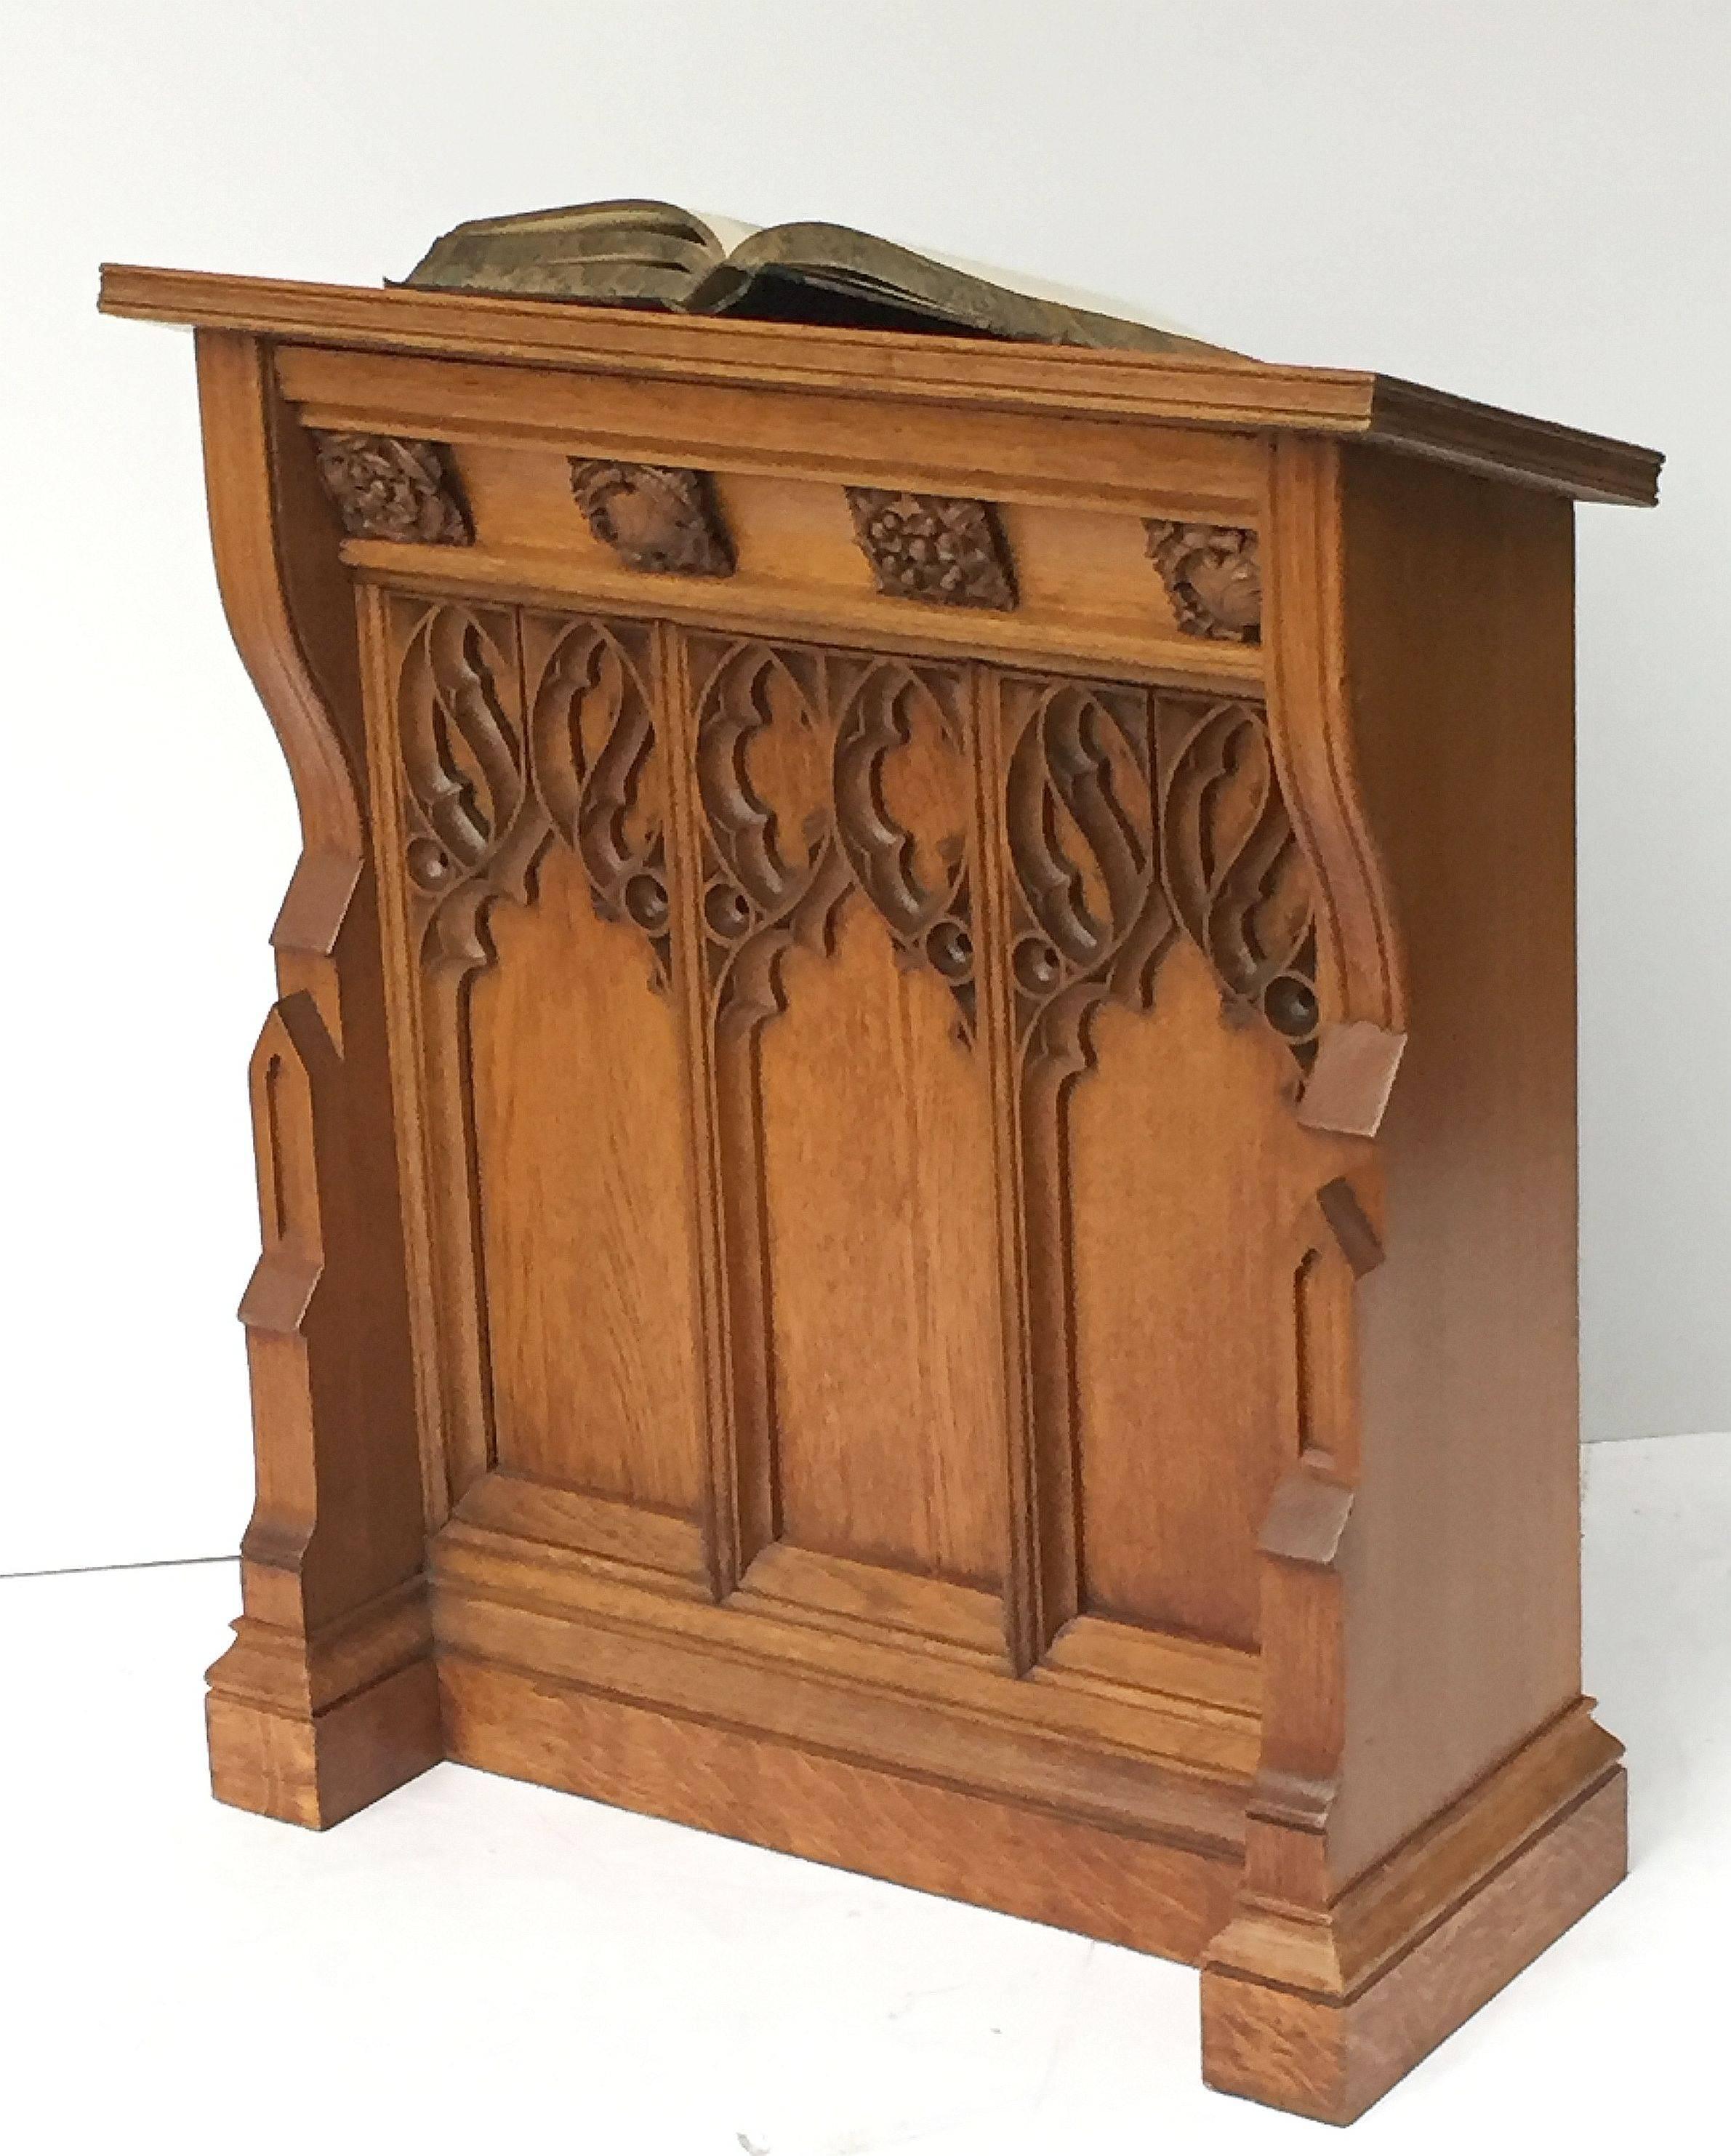 A handsome large English ecclesiastical standing lectern of oak in the Gothic style, featuring one side with slanted stand with support rest for a book, the other side paneled with carved Gothic designs, on a moulded plinth base.

Perfect for a